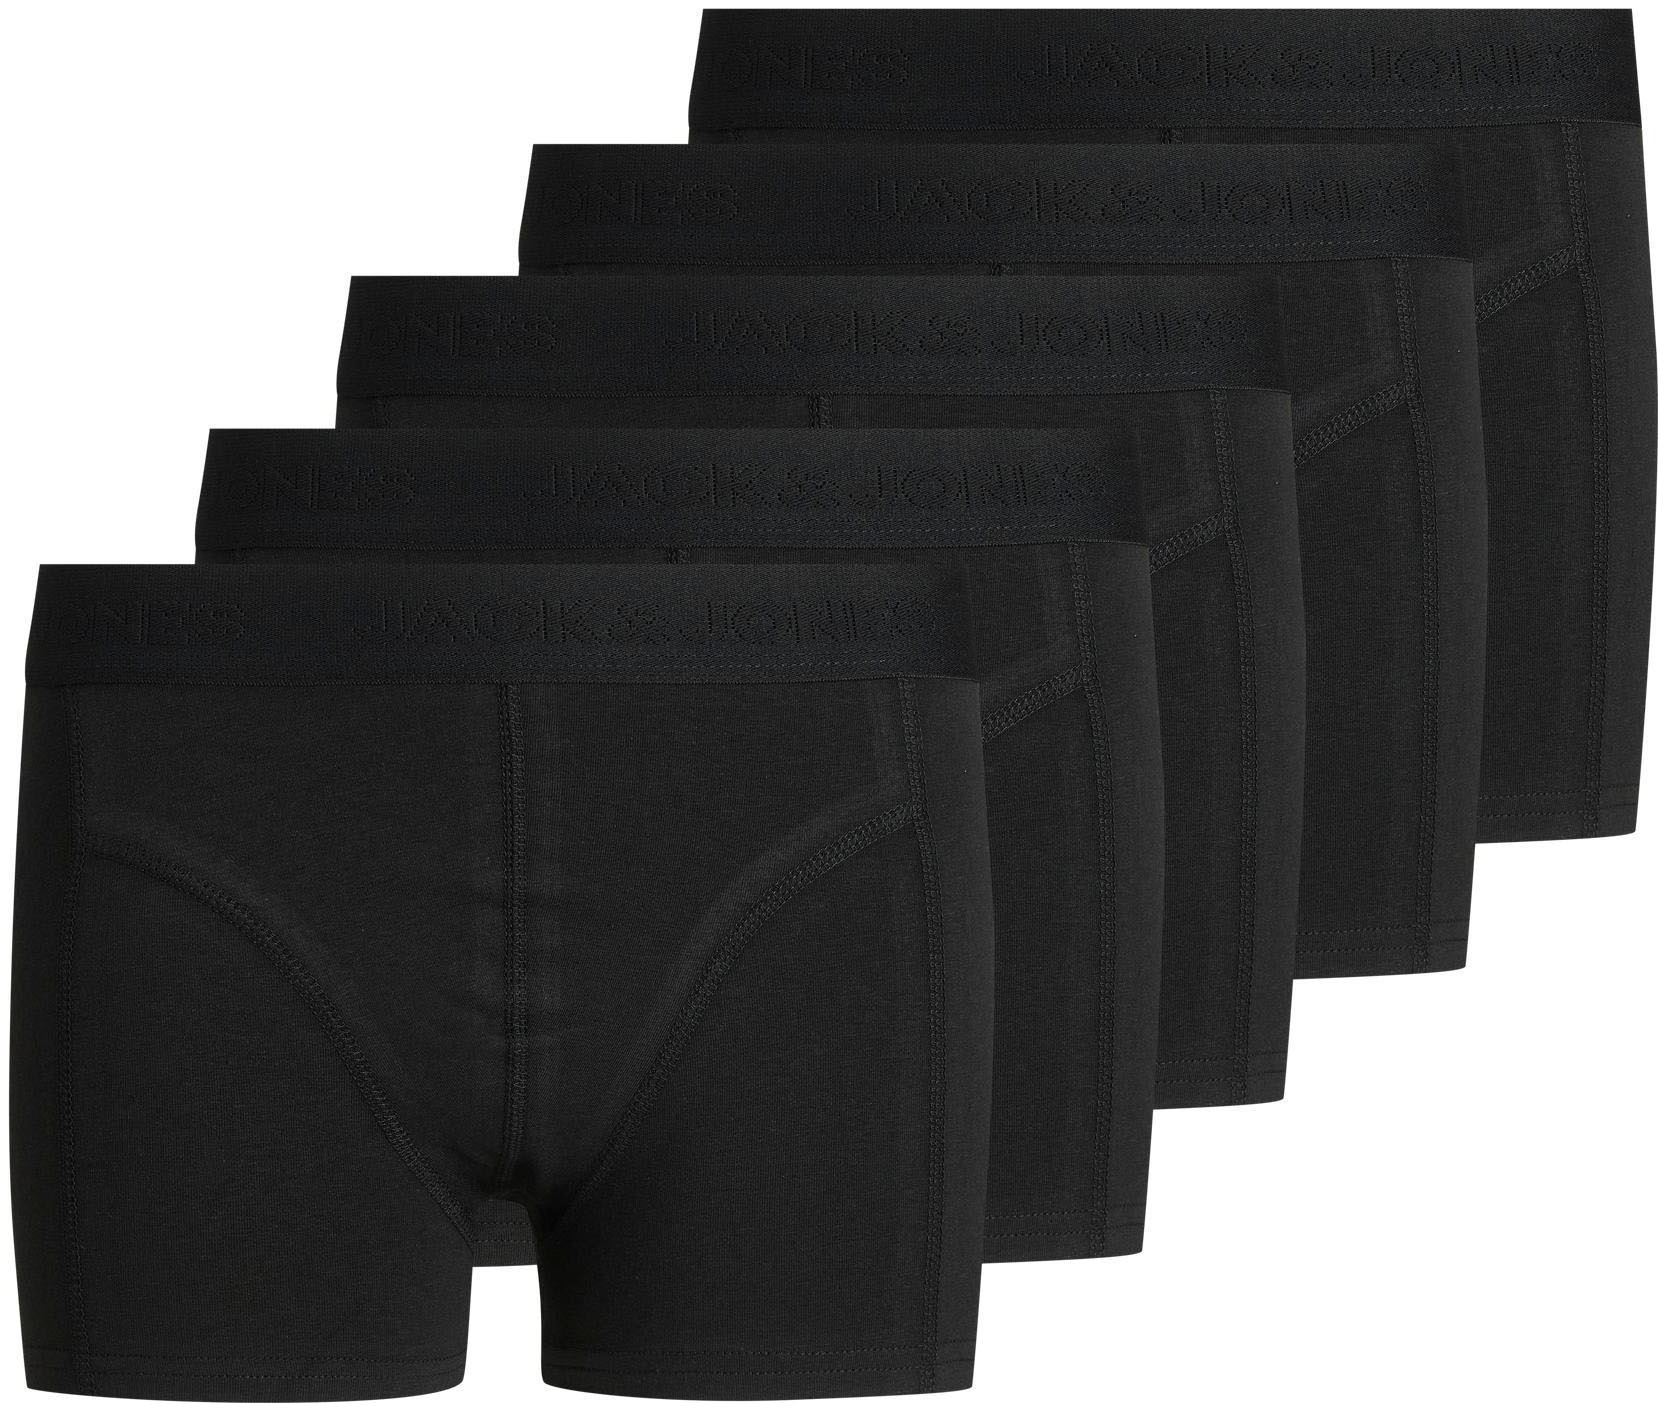 Trunk »JACSIMPLE TRUNKS 5 PACK JNR«, (Packung, 5 St.)